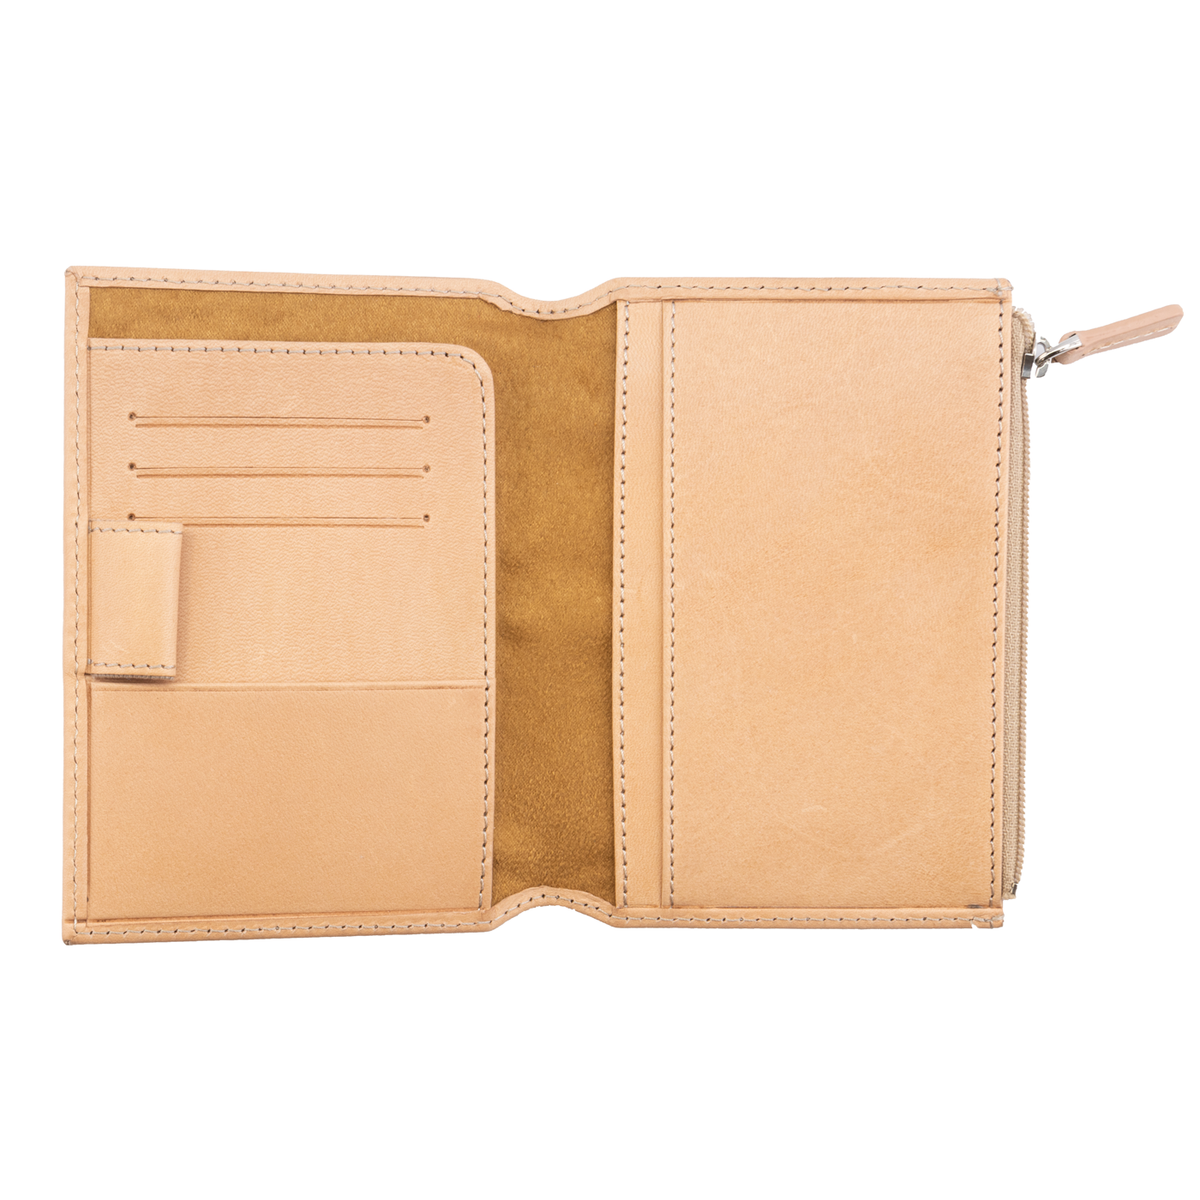 Galen Leather Wallet Insert Passport Sized - undyed Leather